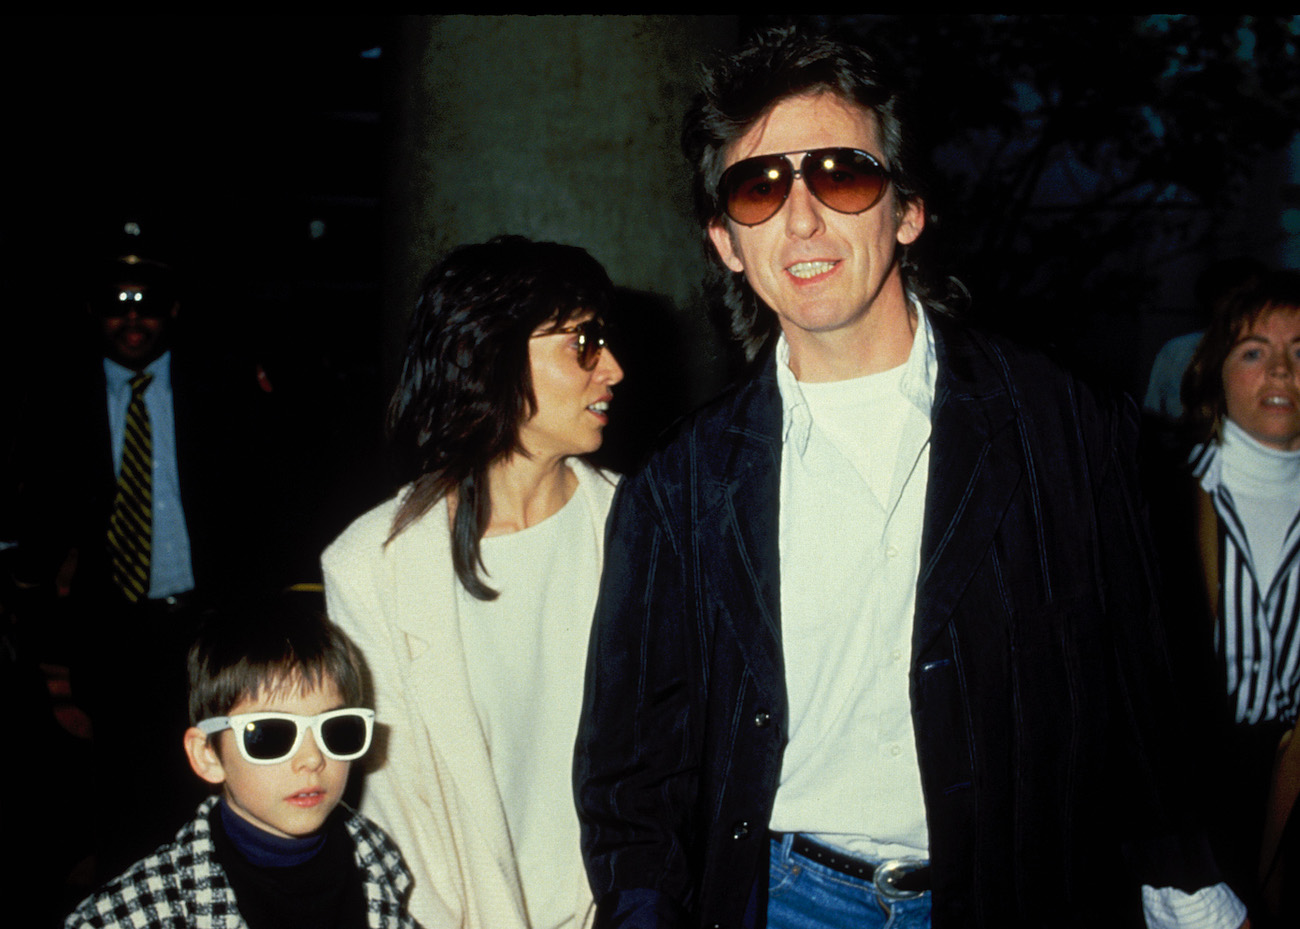 George Harrison with his wife Olivia and their son Dhani at LAX Airport in 1988.